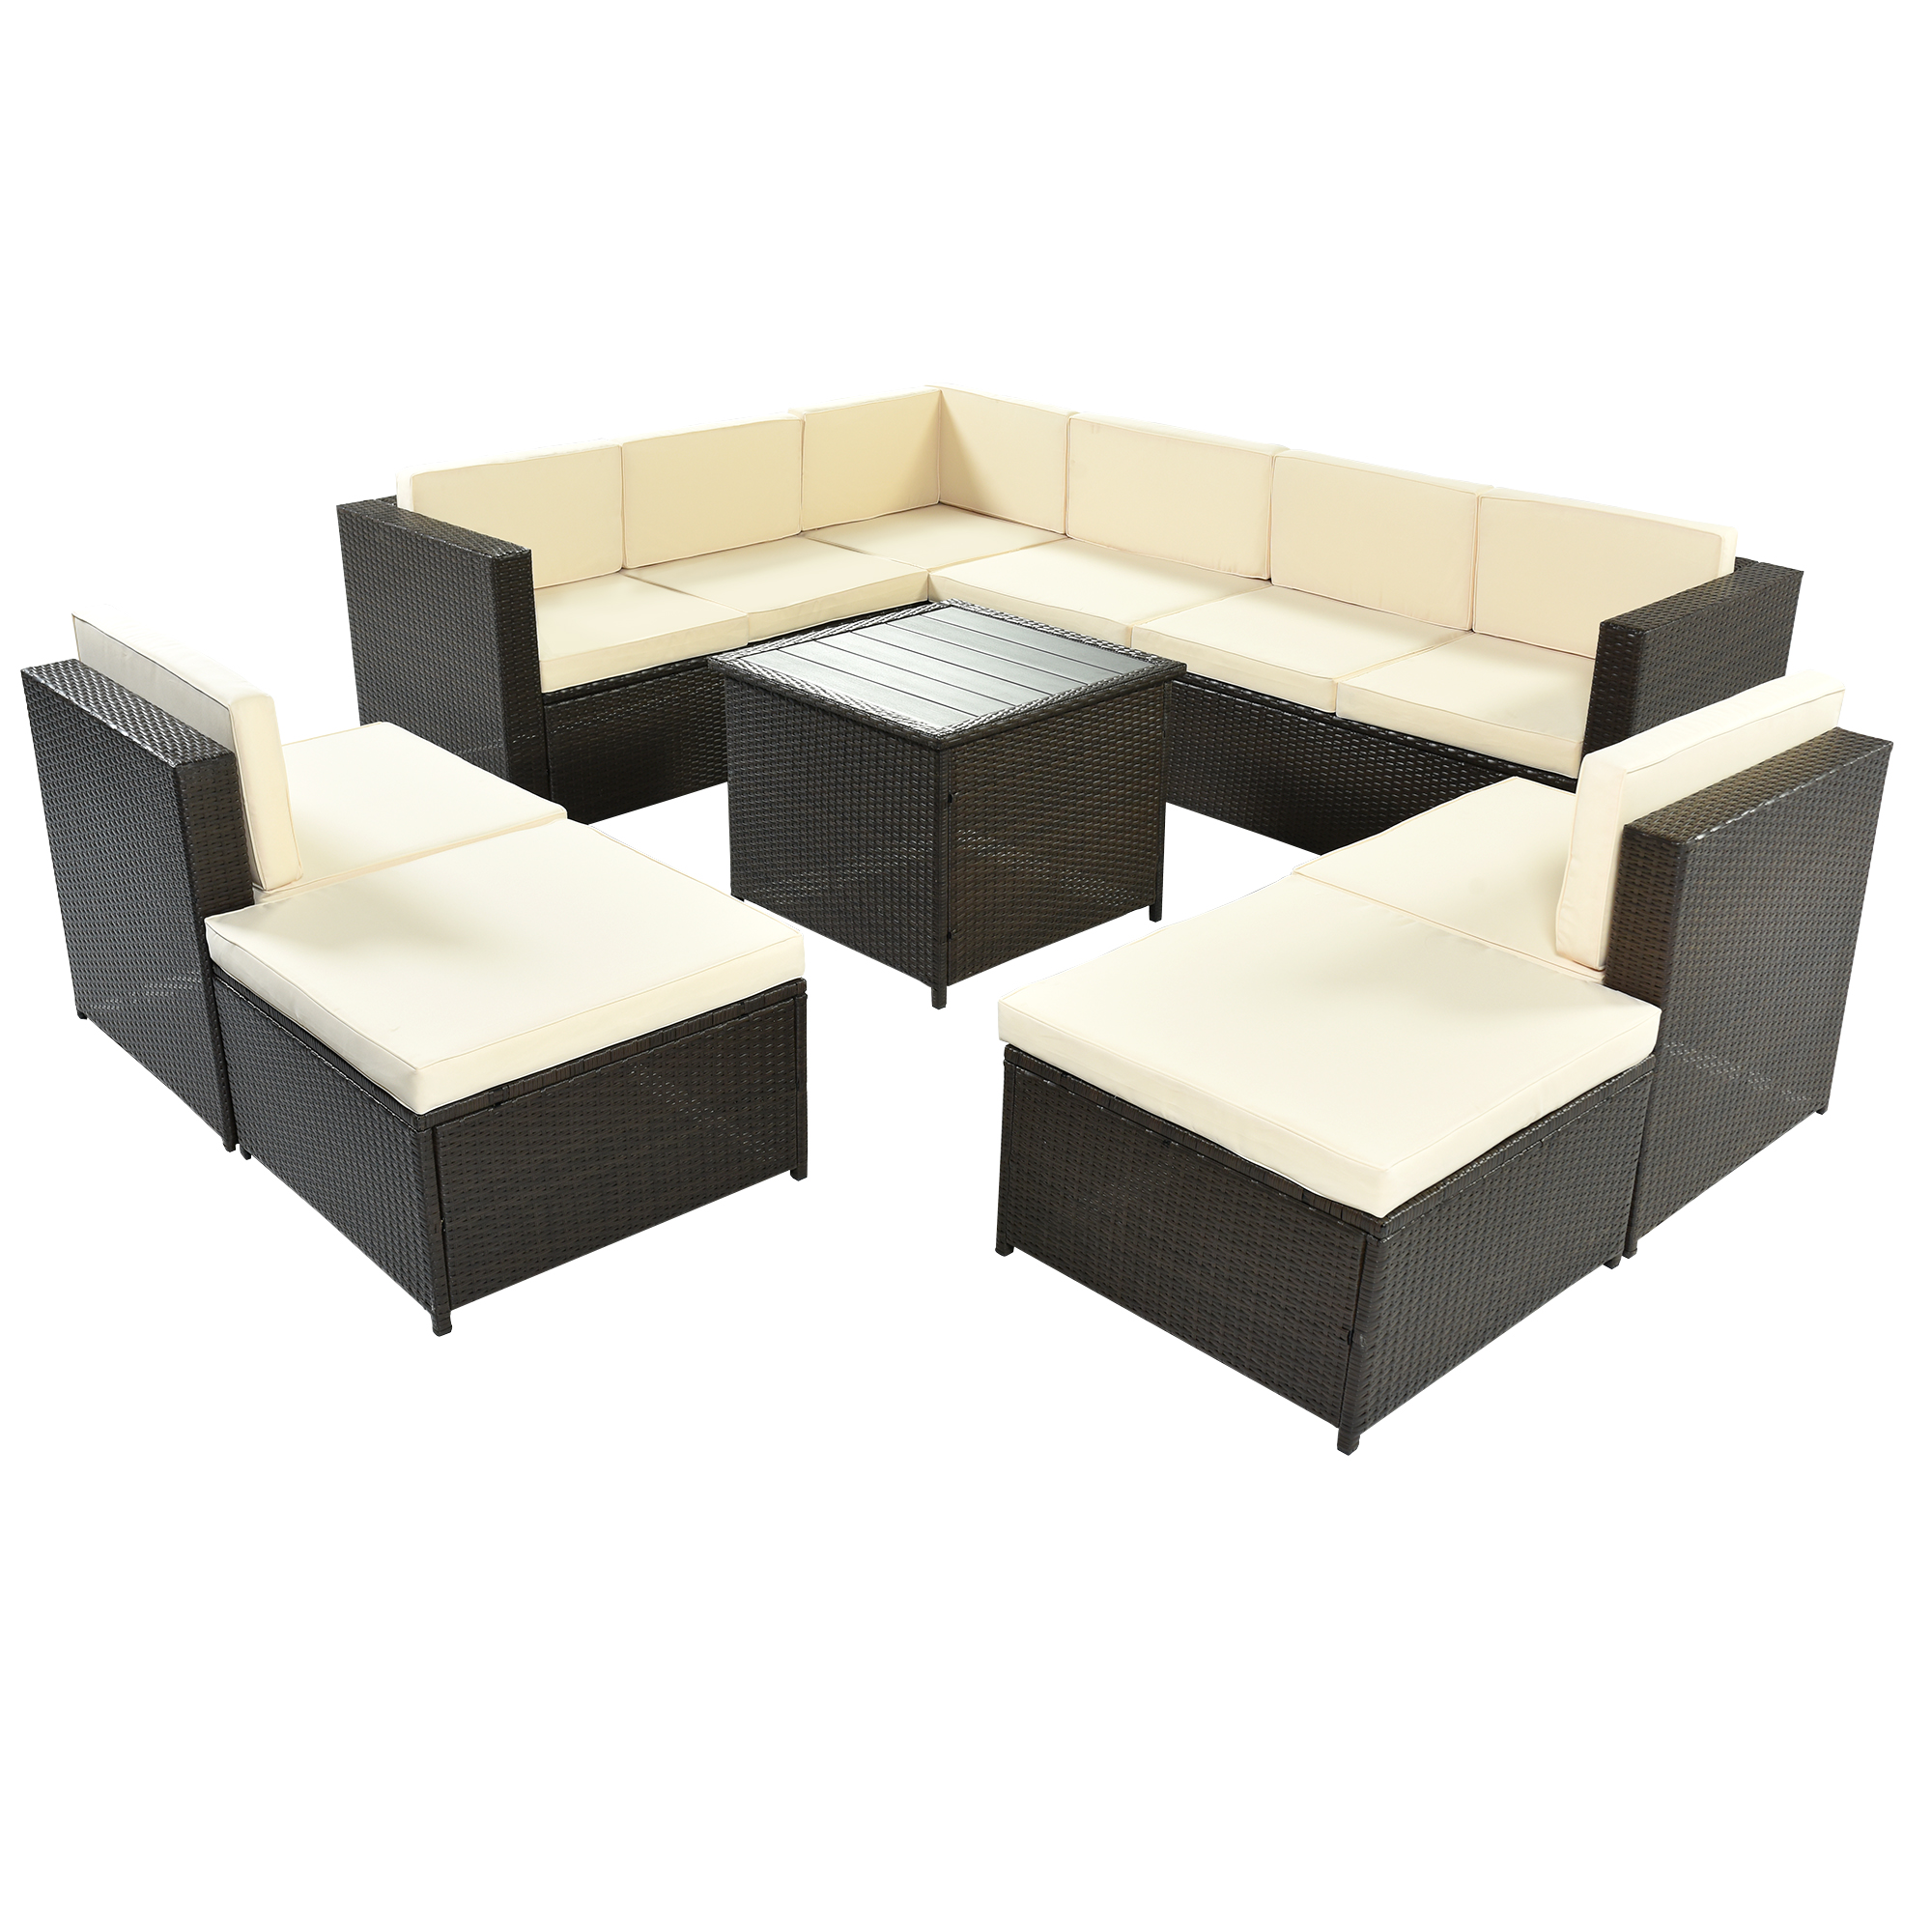 9 Piece Rattan Sectional Seating Group with Cushions and Ottoman, Patio Furniture Sets, Outdoor Wicker Sectional-CASAINC